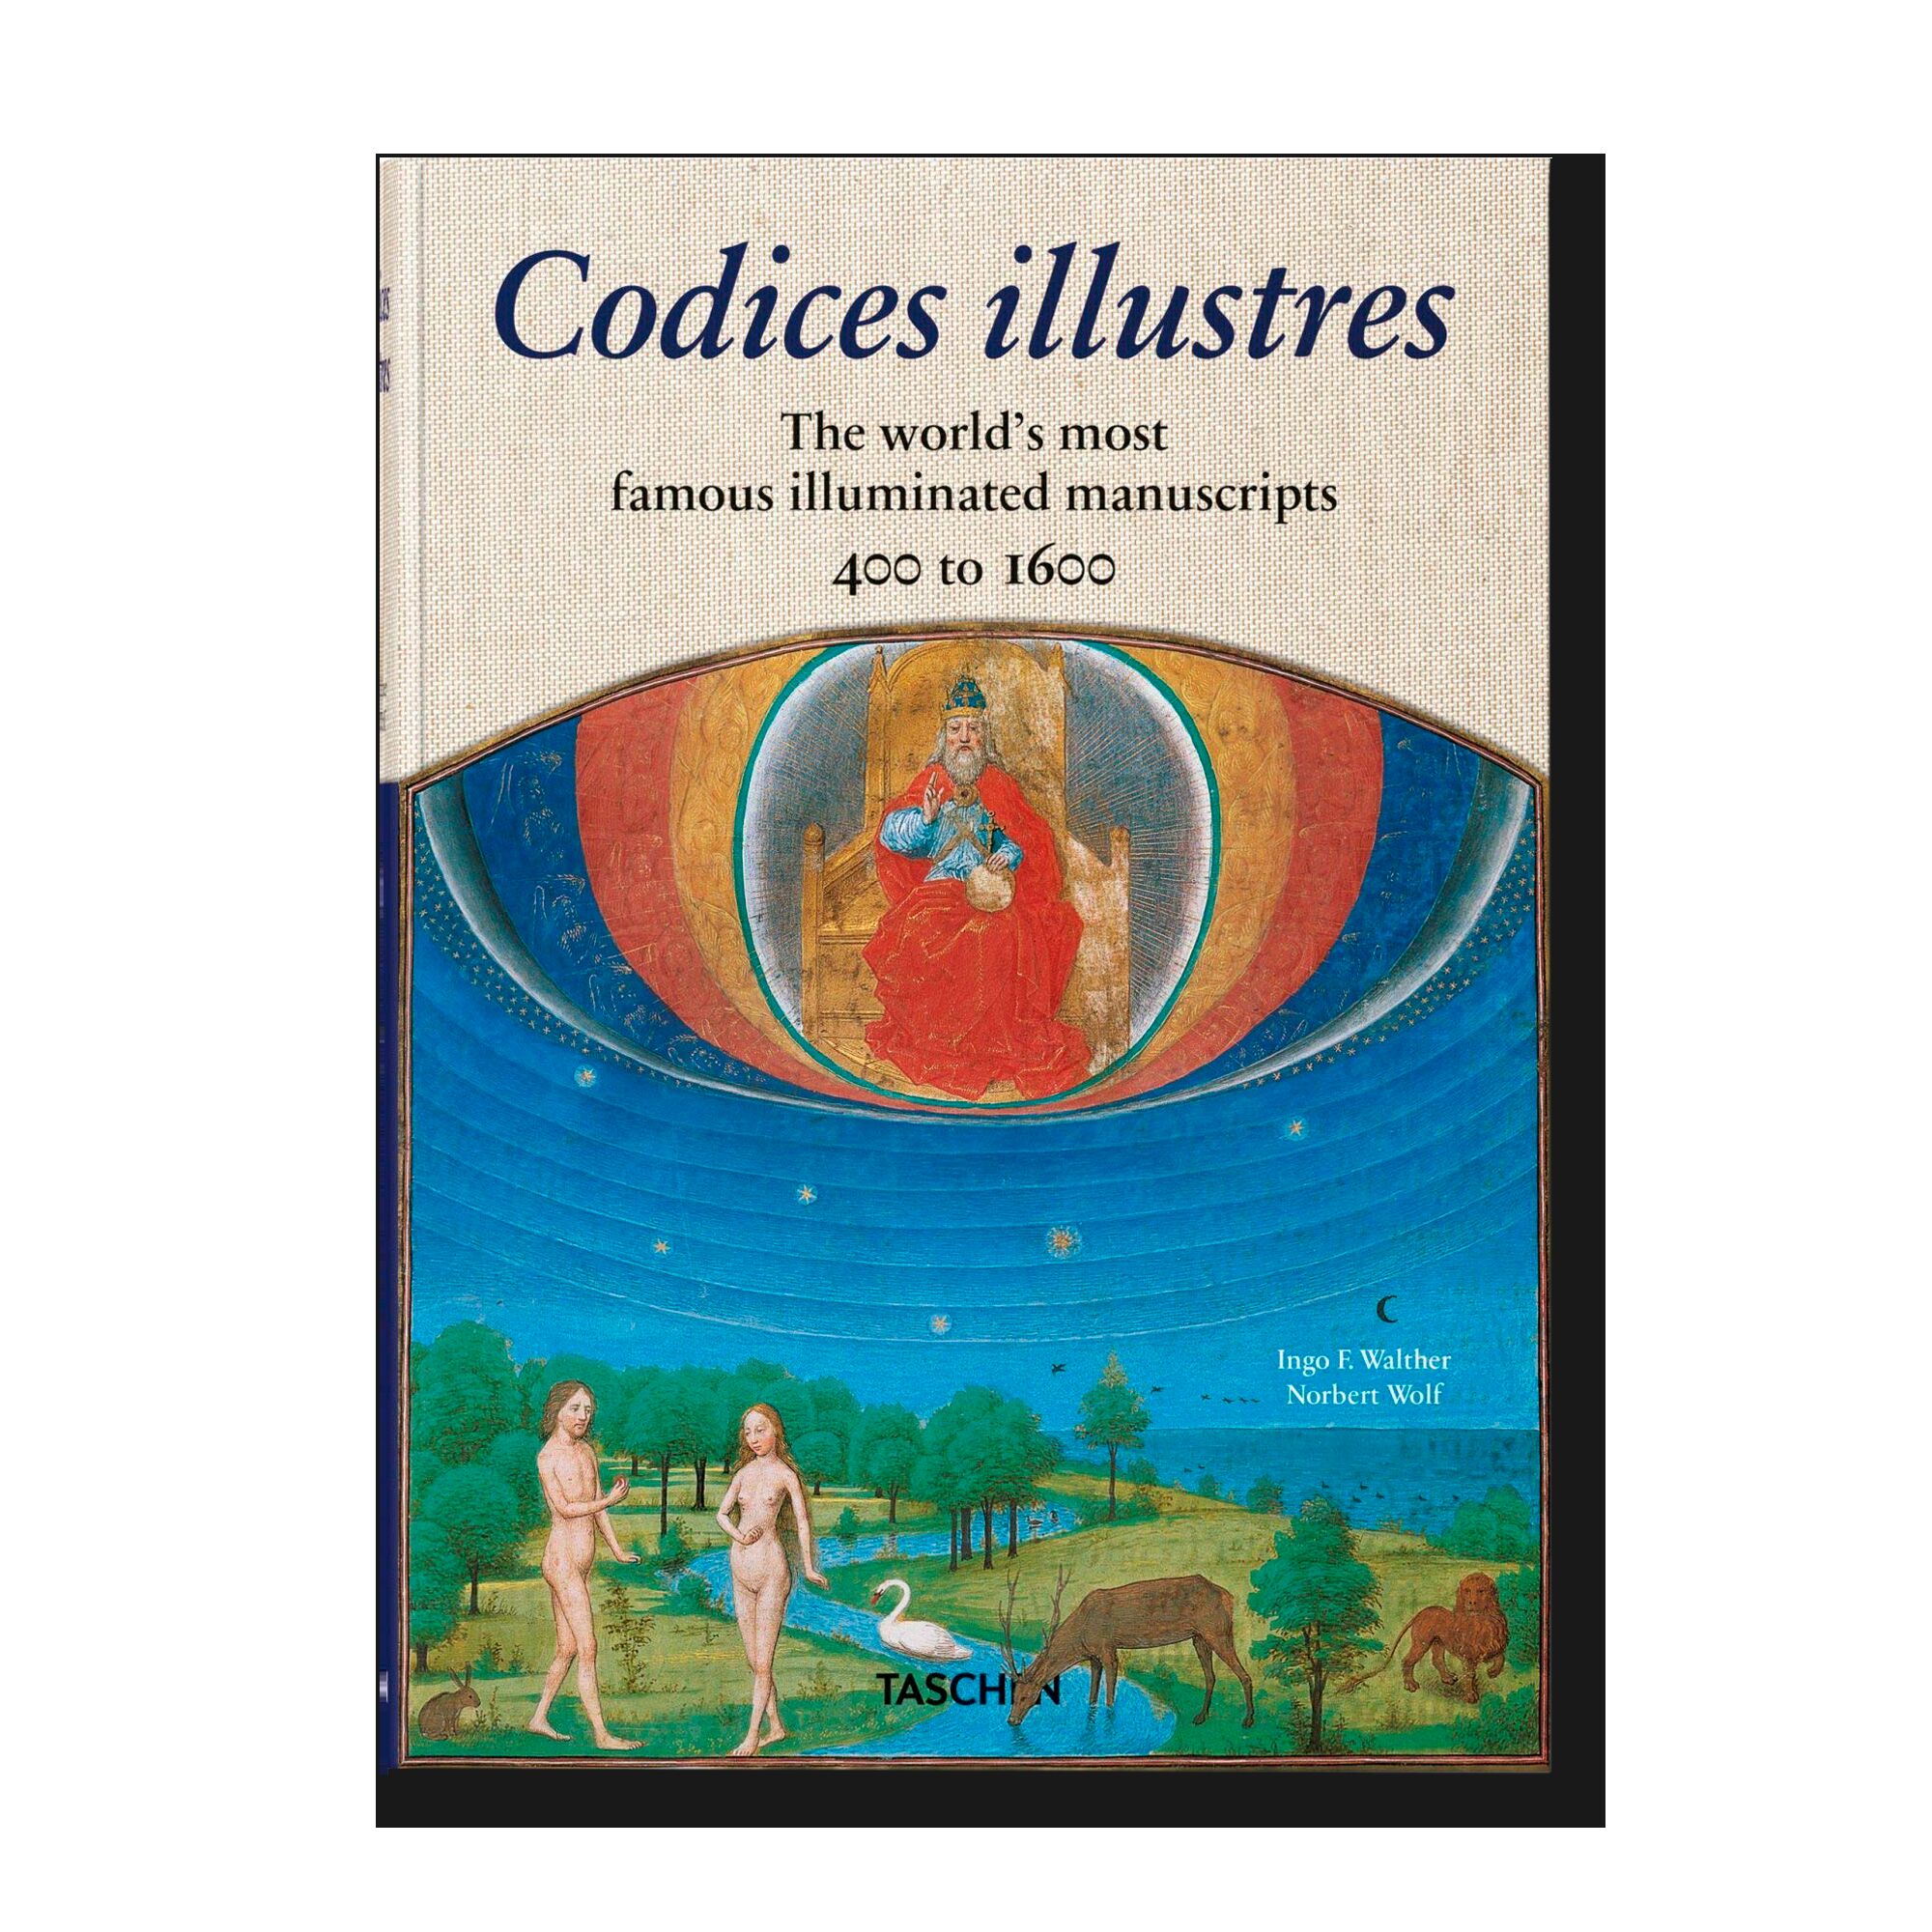 Codices Illustres: The World's Most Beautiful Manuscripts 400 to 1600